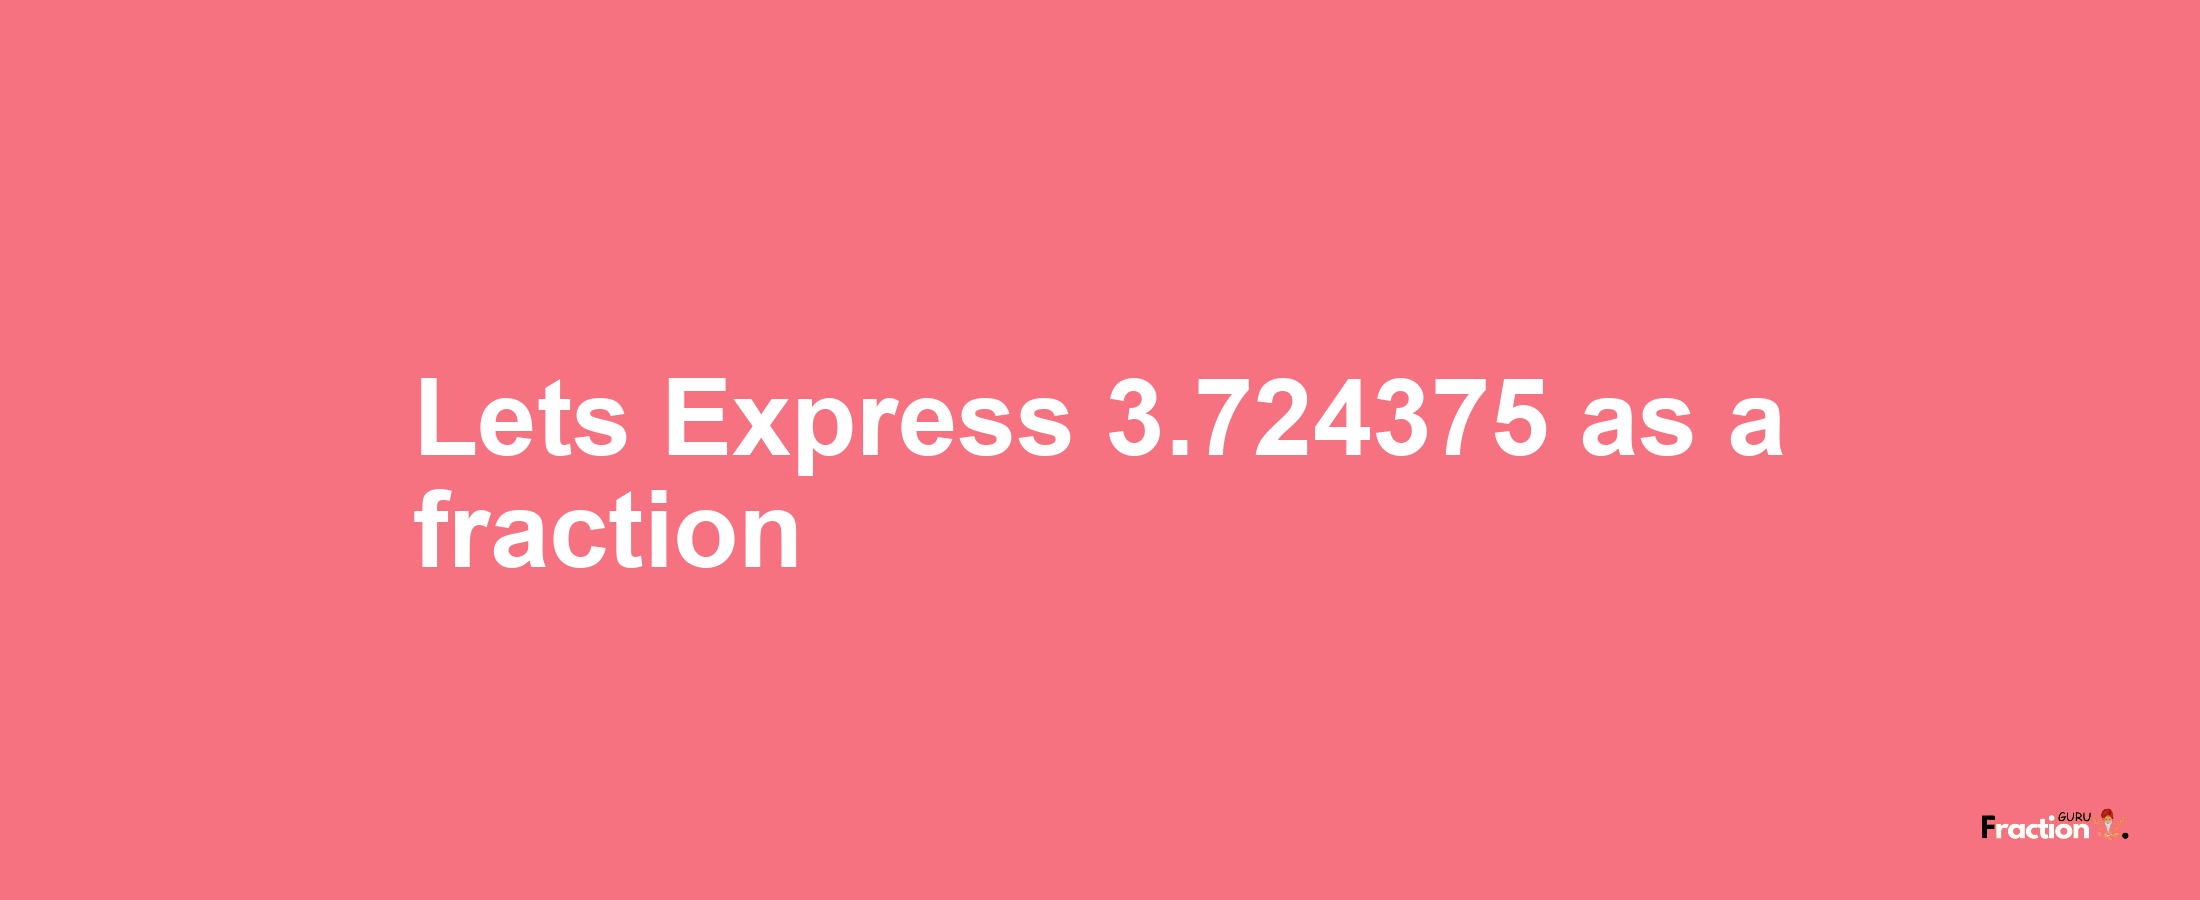 Lets Express 3.724375 as afraction